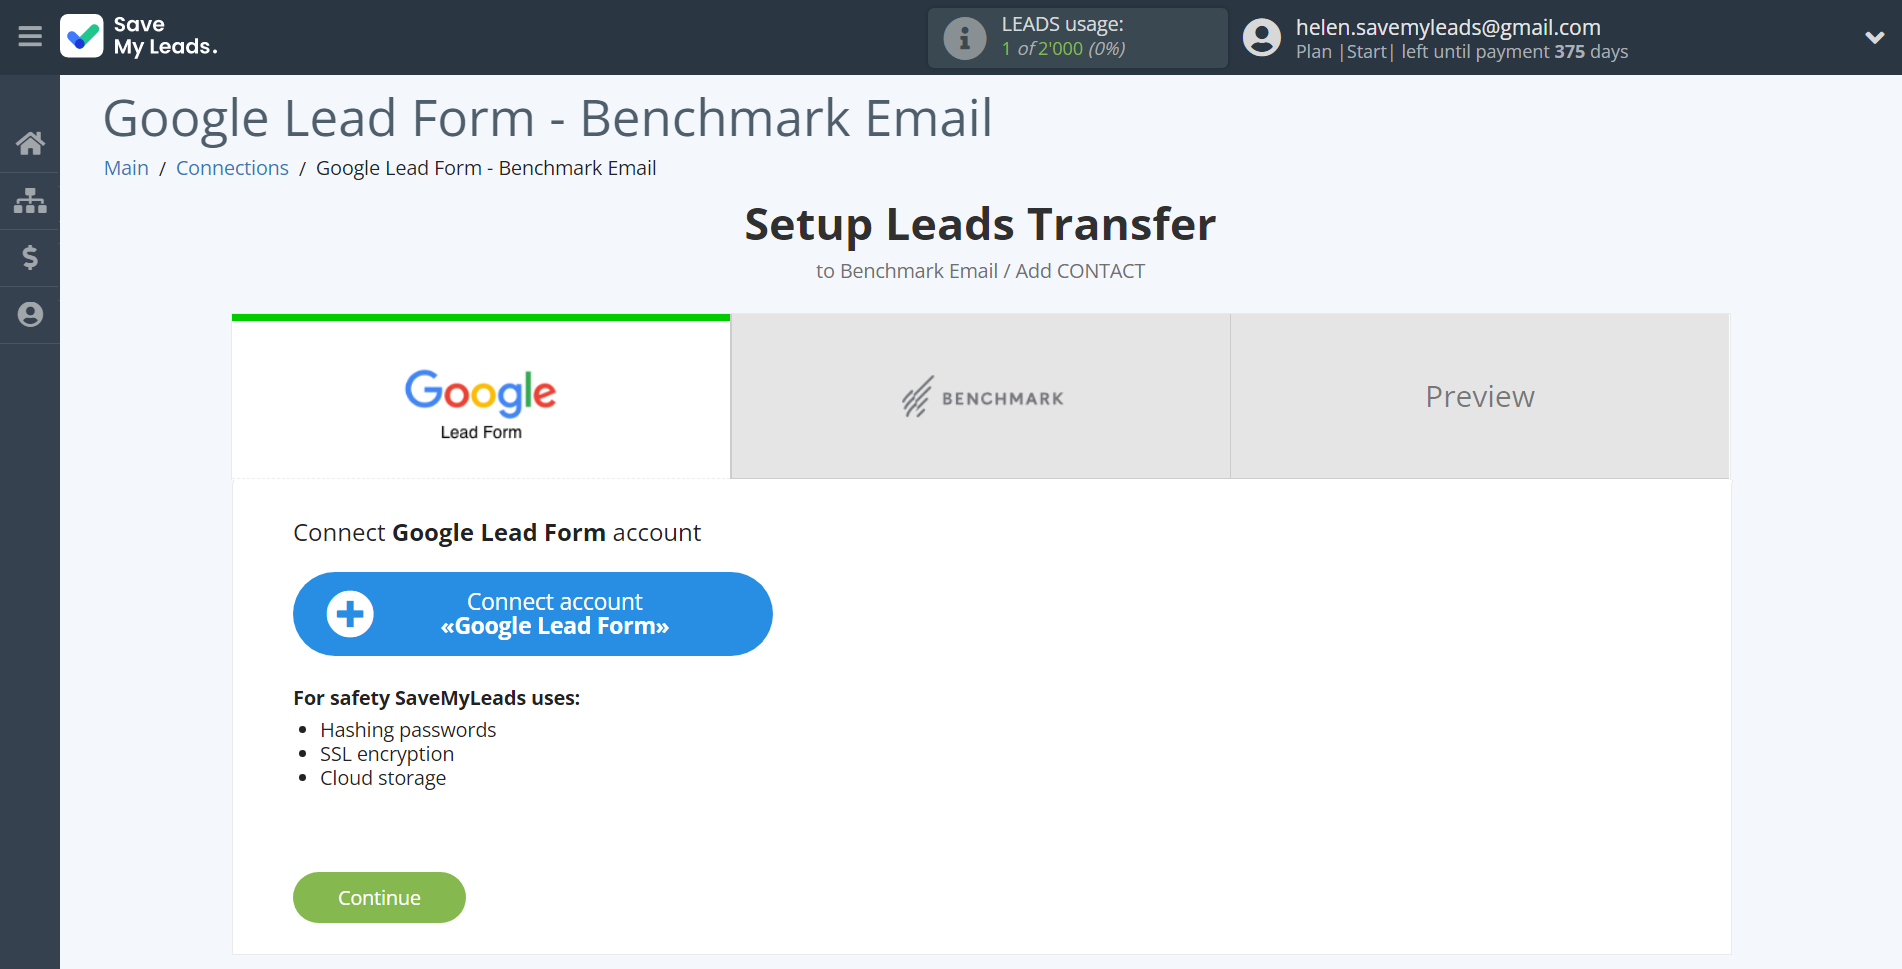 How to Connect Google Lead Form with Benchmark Email | Data Source account